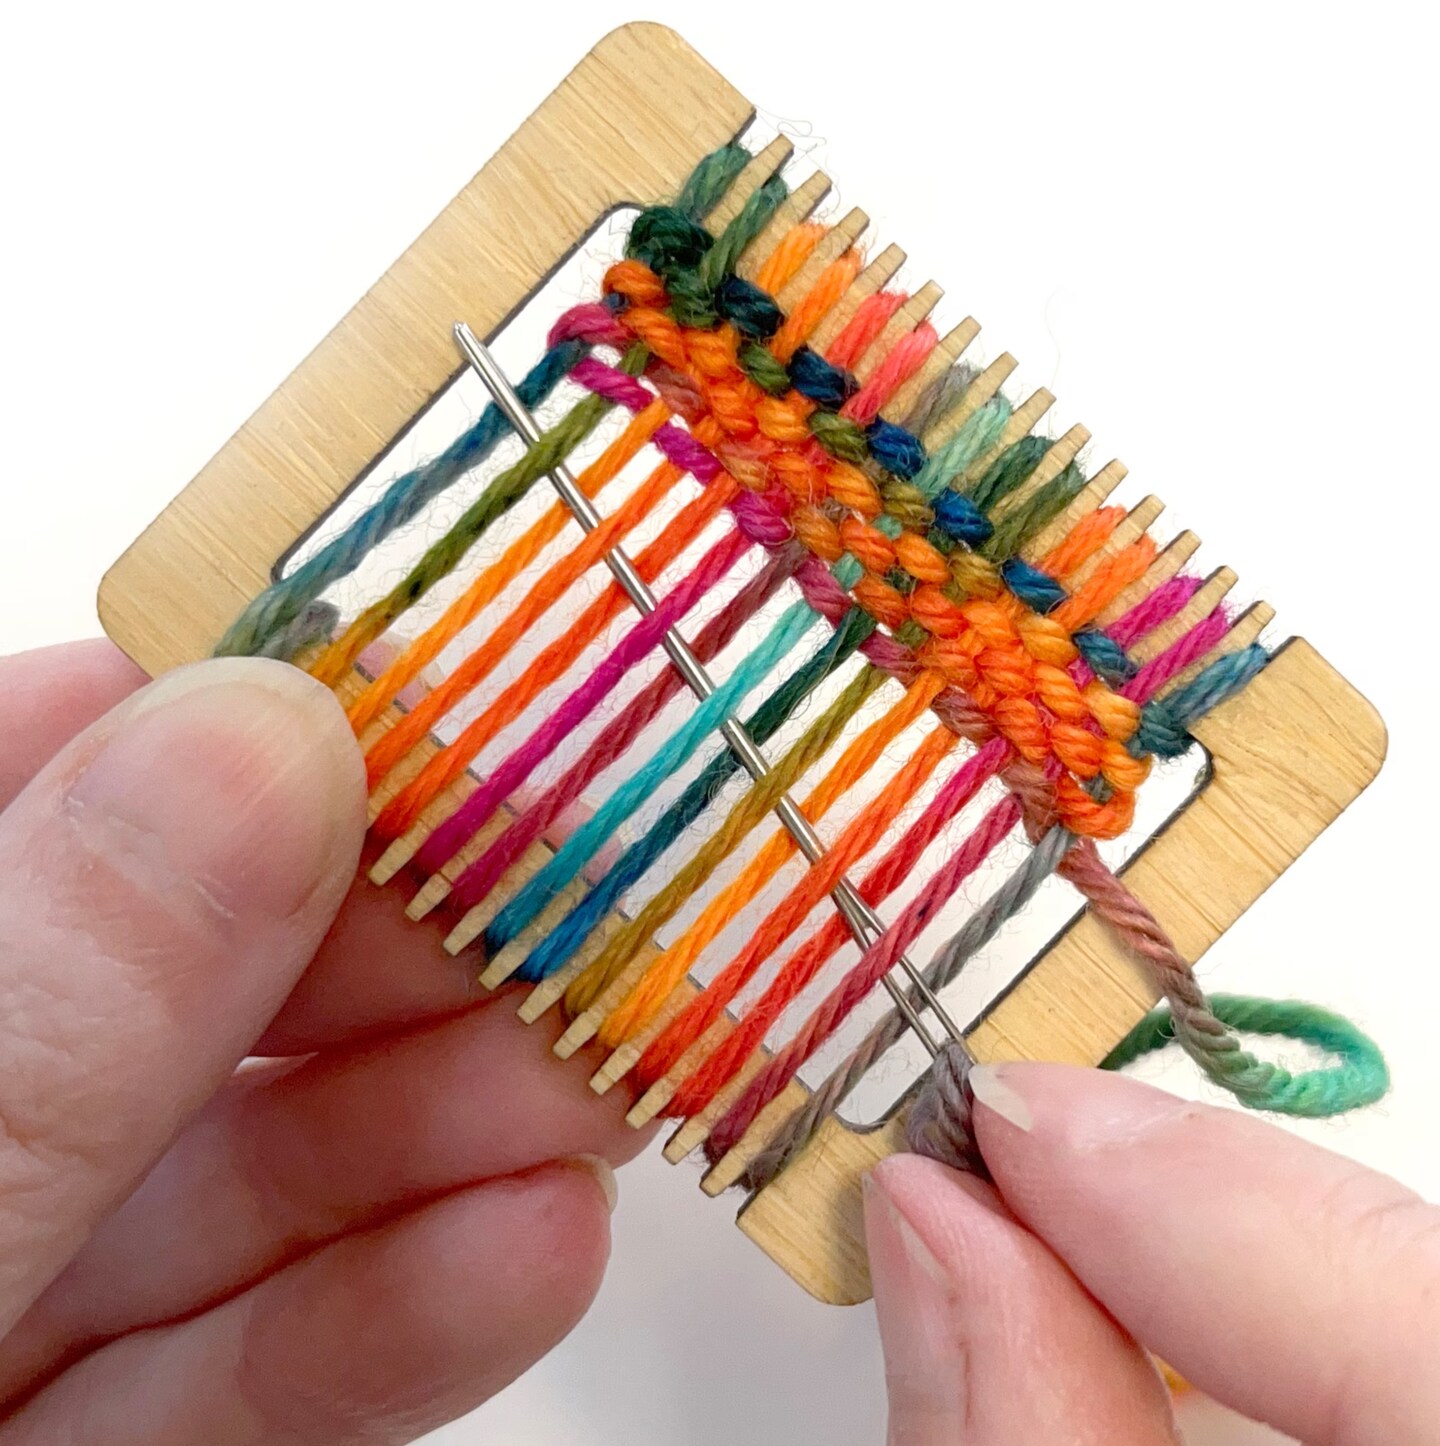 Mini Loom Kit for Weaving - Ethically Sourced Yarn, Craft Kits, Home Goods, Clothing & Accessories